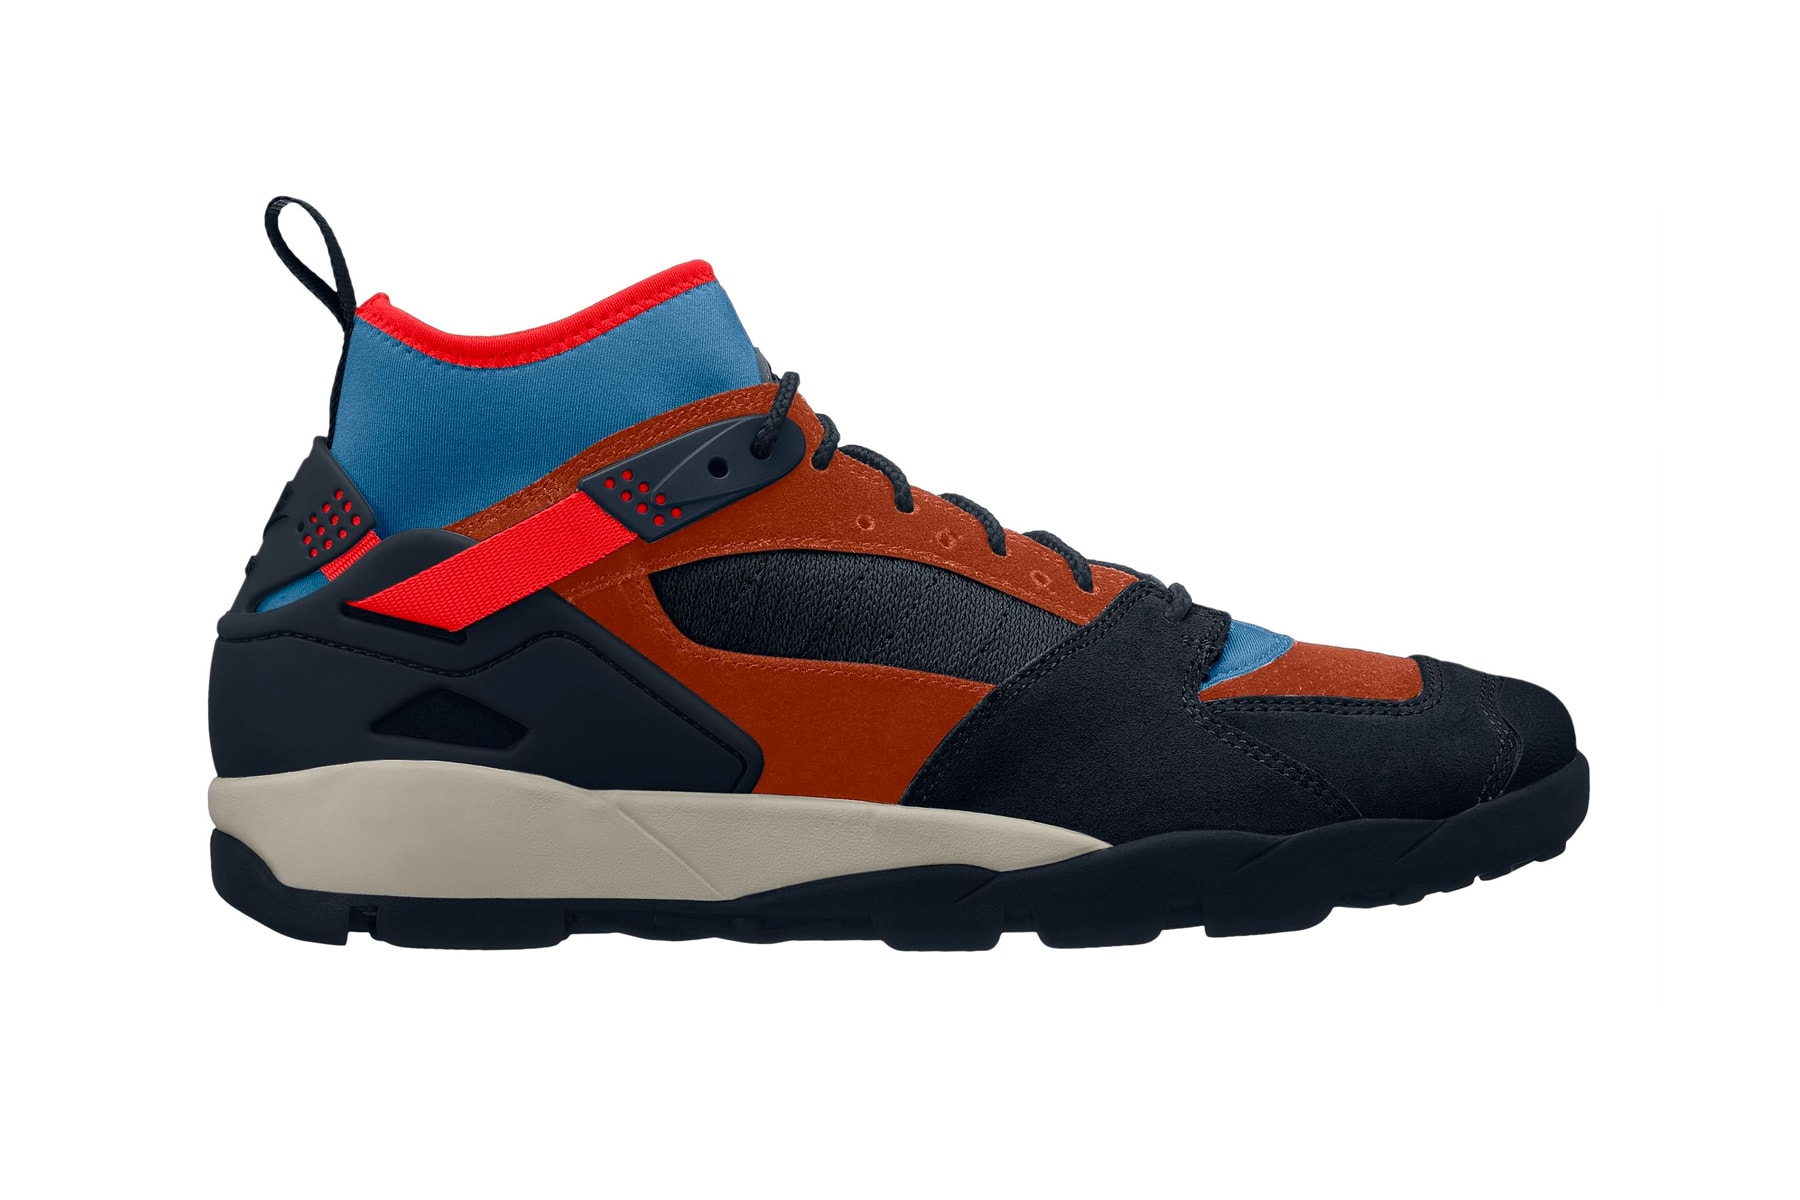 Nike ACG Air Revaderchi 2018 Release colorways sneakers trail runner classic archive